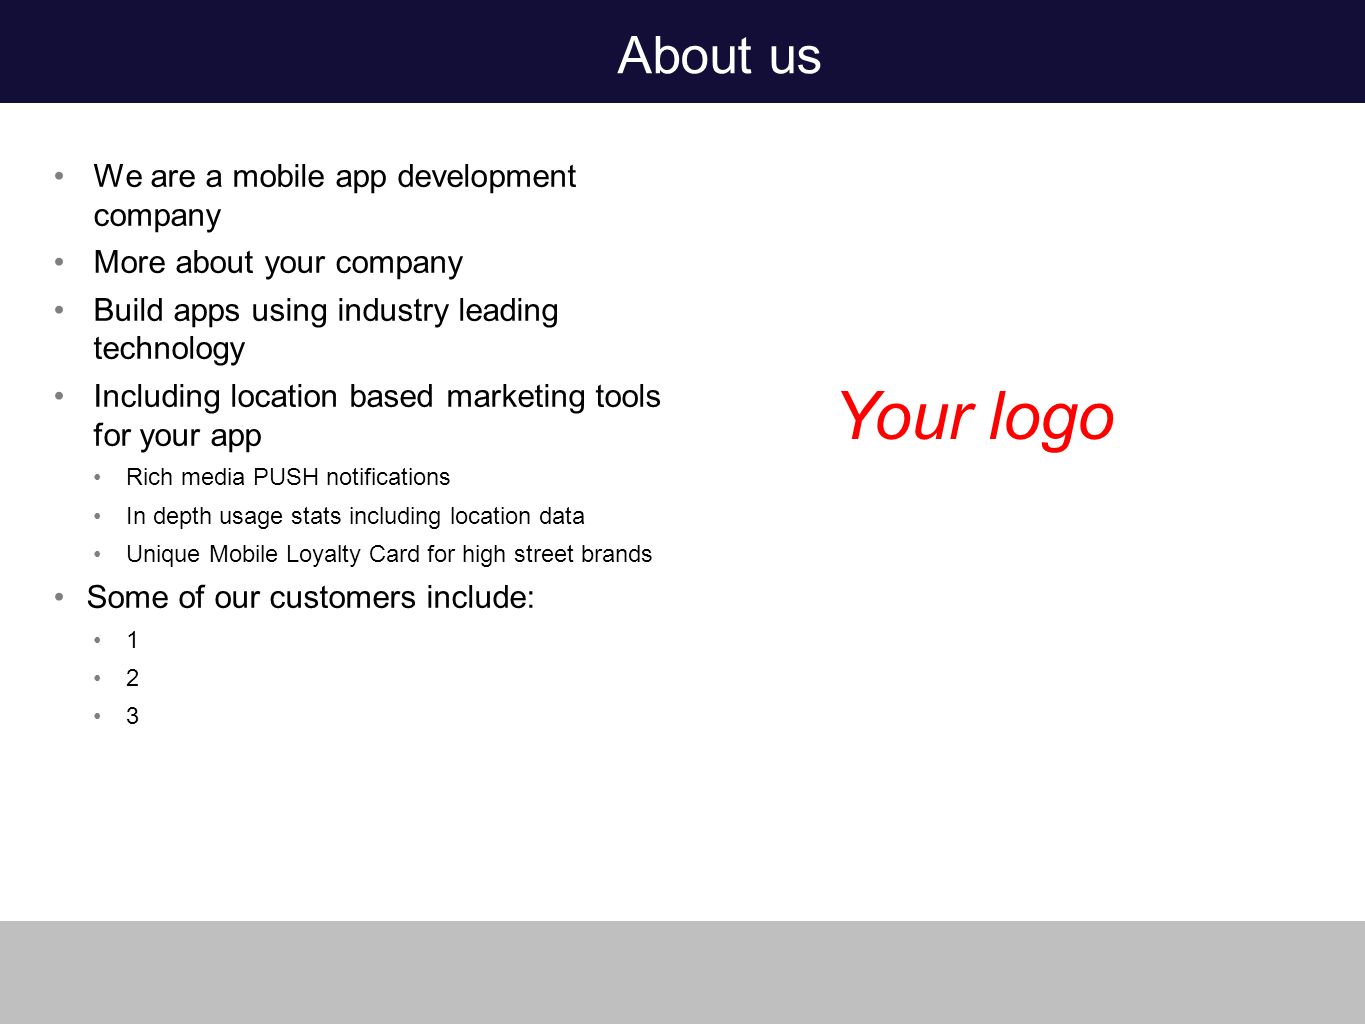 About us We are a mobile app development company More about your company Build apps using industry leading technology Including location based marketing tools for your app Rich media PUSH notifications In depth usage stats including location data Unique Mobile Loyalty Card for high street brands Some of our customers include: Your logo